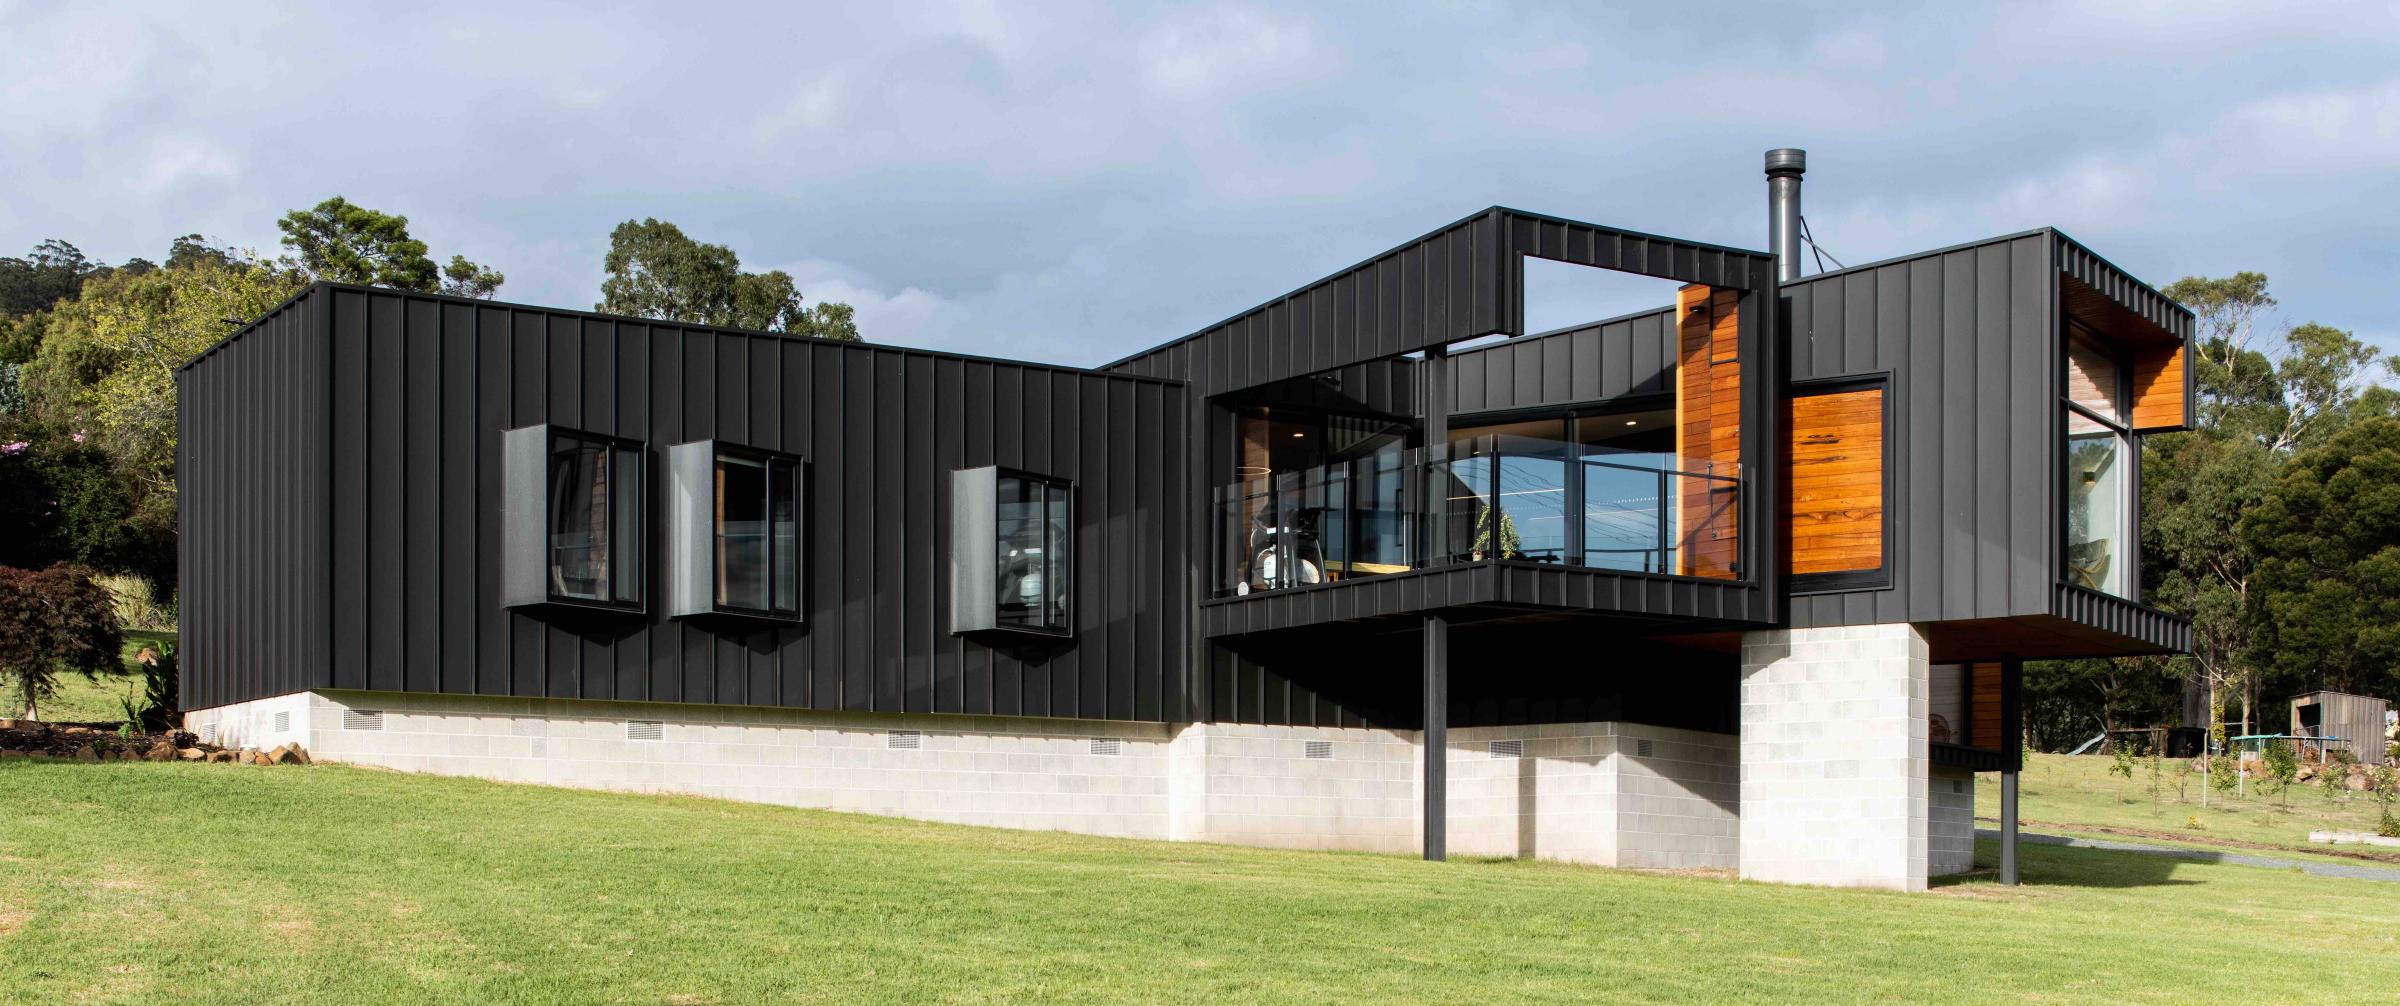 'Jetty House' by Edwards + Simpson Architects